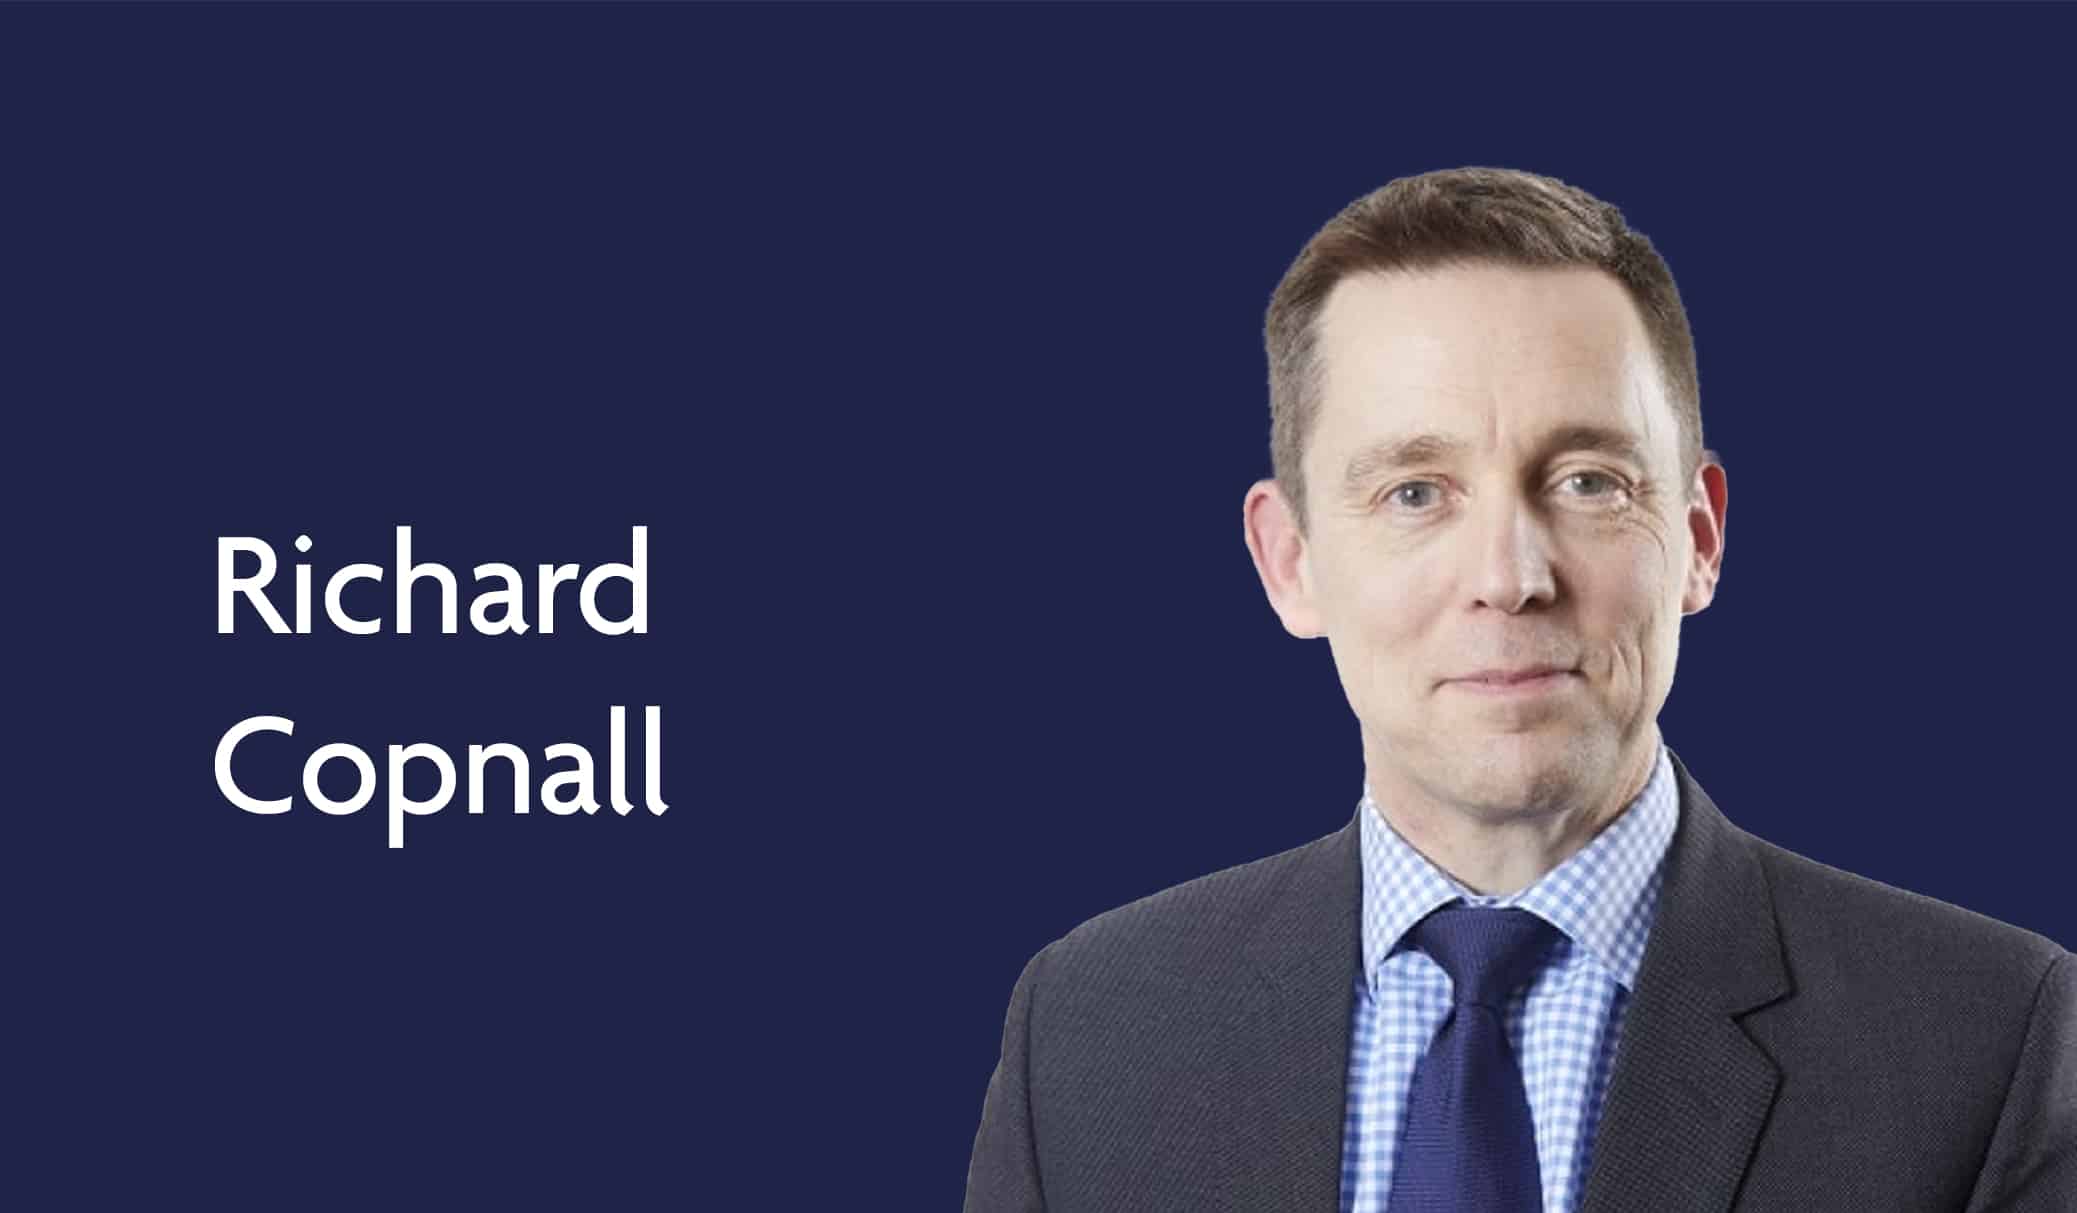 Richard Copnall featured in the January edition of Counsel Magazine